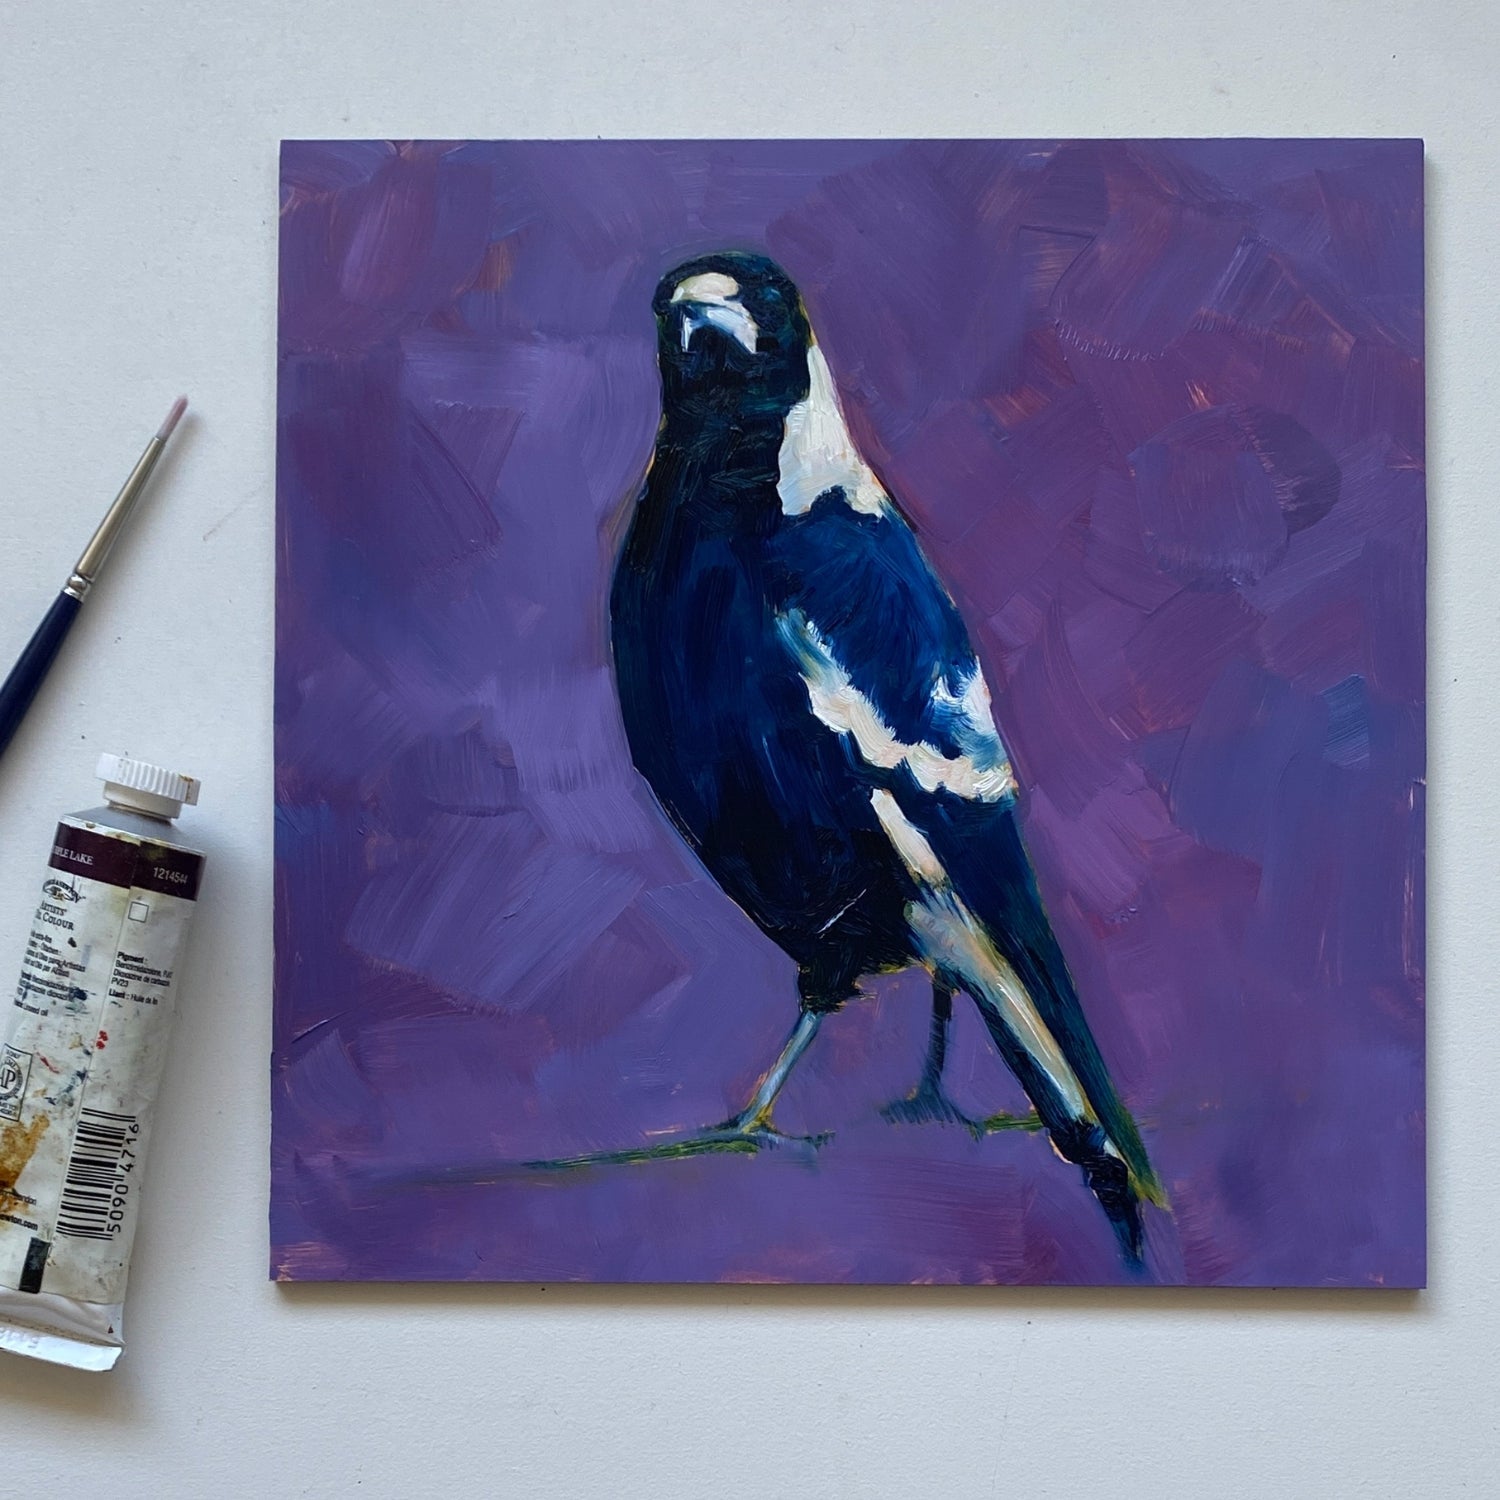 styling photo of a closeup of an original oil painting of a navy blue and white magpie with its head tilted on a bright and textured purple with bits of blue background. The painting is sitting on a white surface and there is a paintbrush and paint tube next to it.